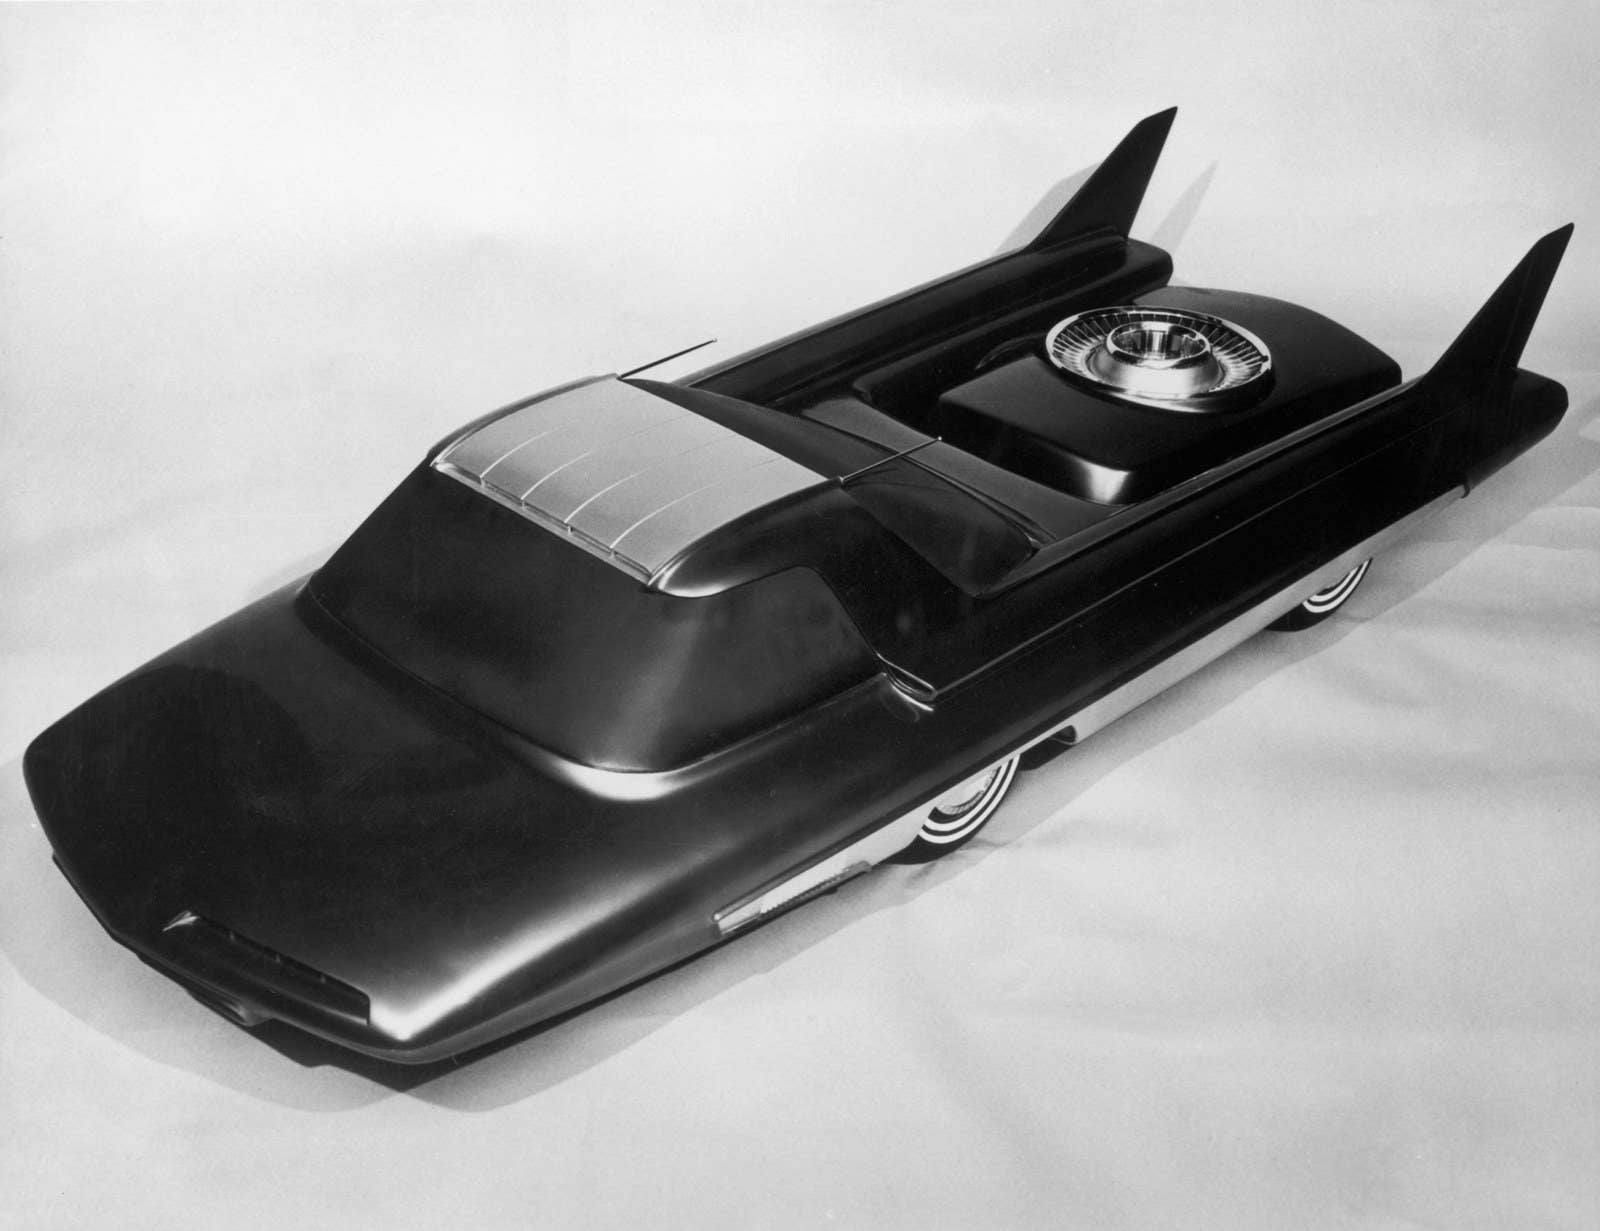 A model of the Nucleon, an atomic car conceived by Ford but never built, is displayed in 1958.